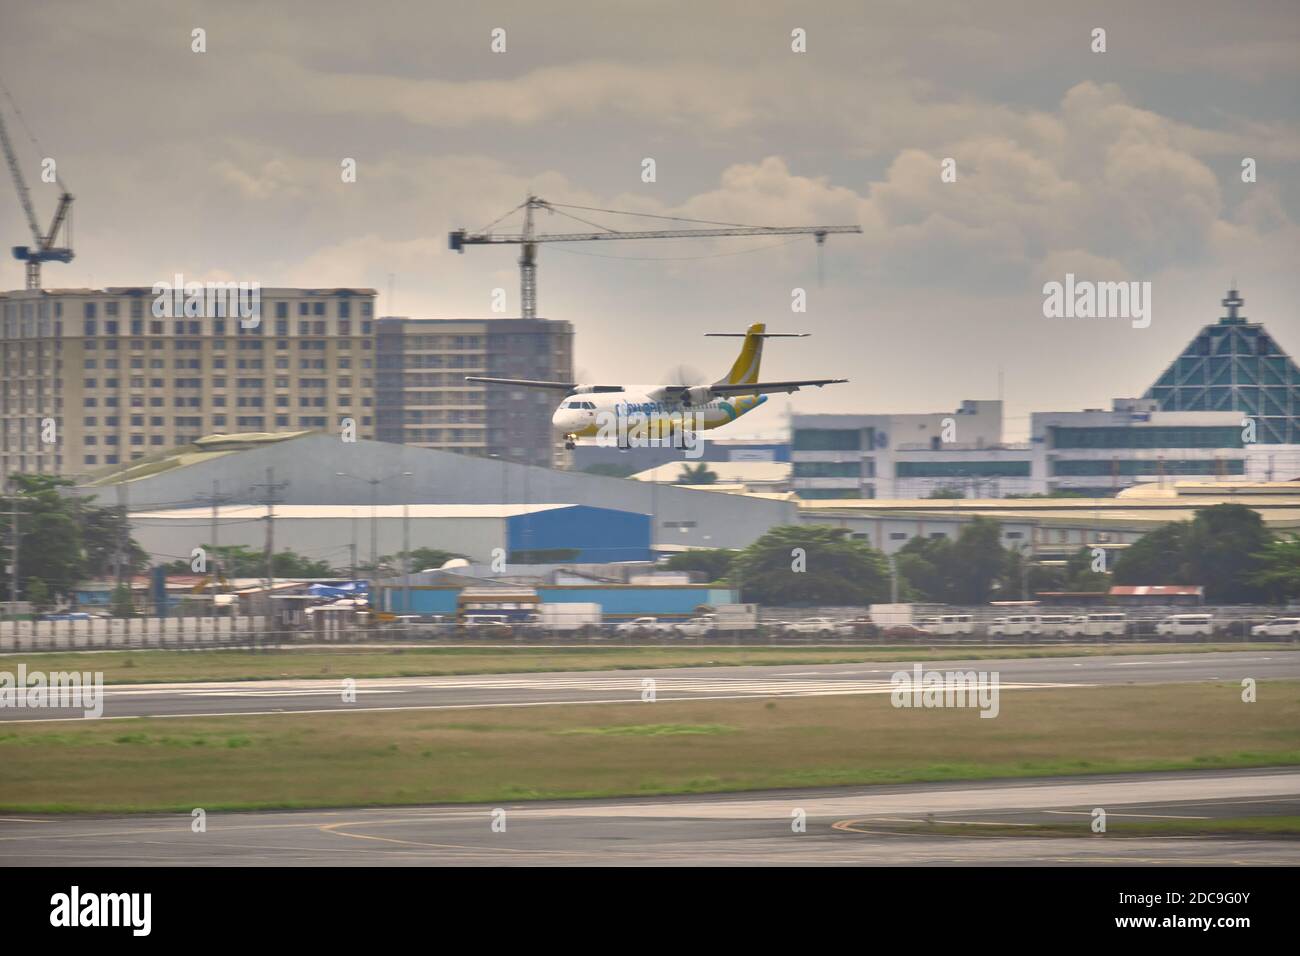 Manila, Philippines - Feb 03, 2020: aircraft cebu pacific air ands on the runway Stock Photo